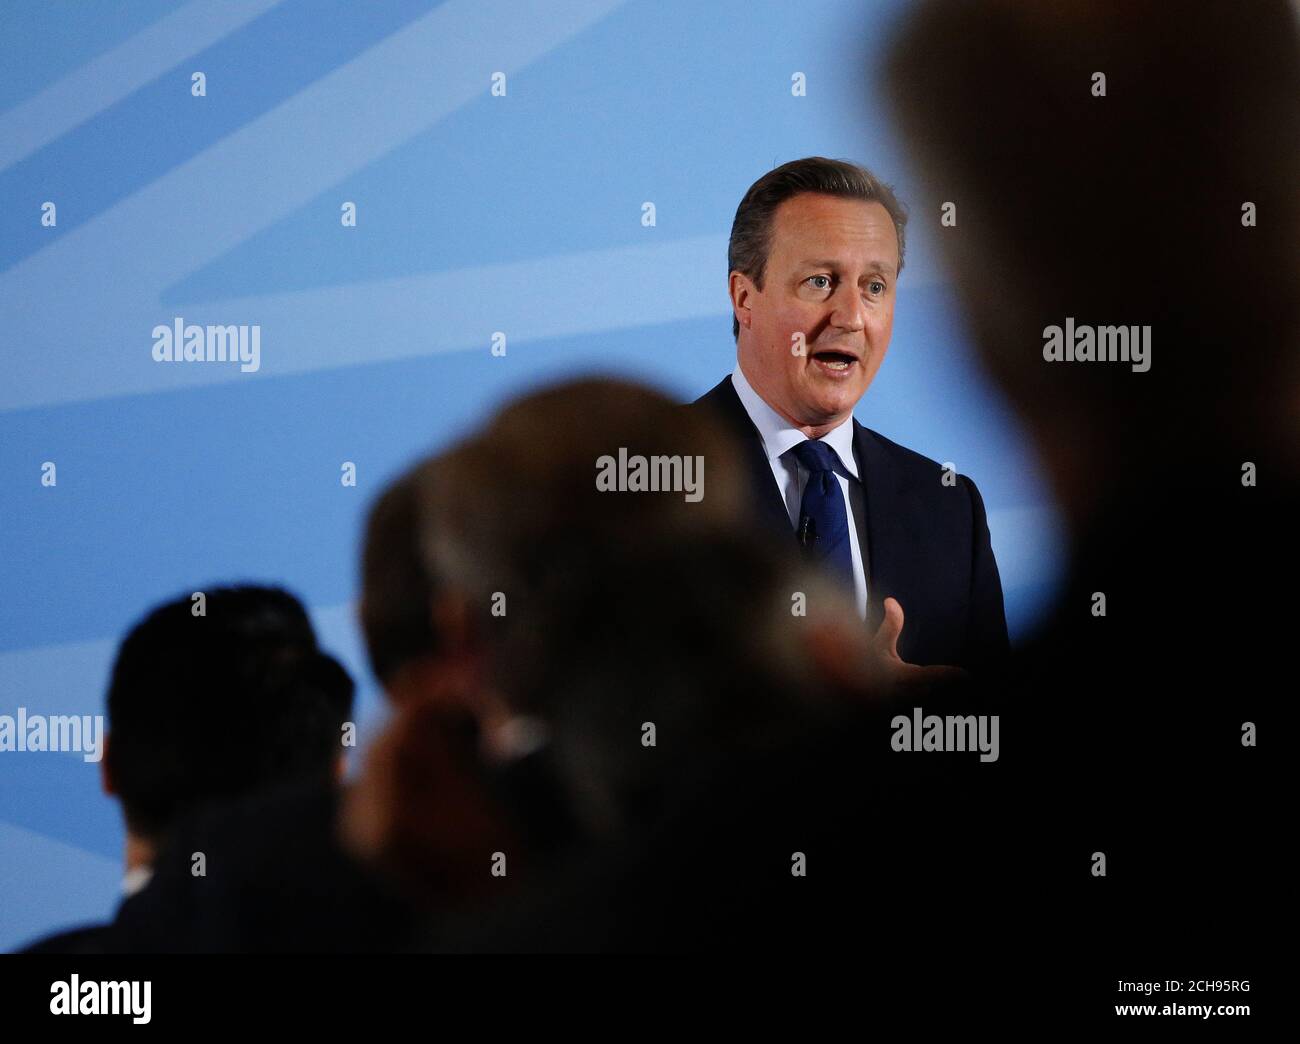 Prime Minister David Cameron addresses members of a World Economic Forum at the Mansion House in London, during which he dismissed claims by the Leave camp that quitting would lead to a bonfire of regulations as 'very, very weak' and insisted three million jobs were linked to membership. Stock Photo